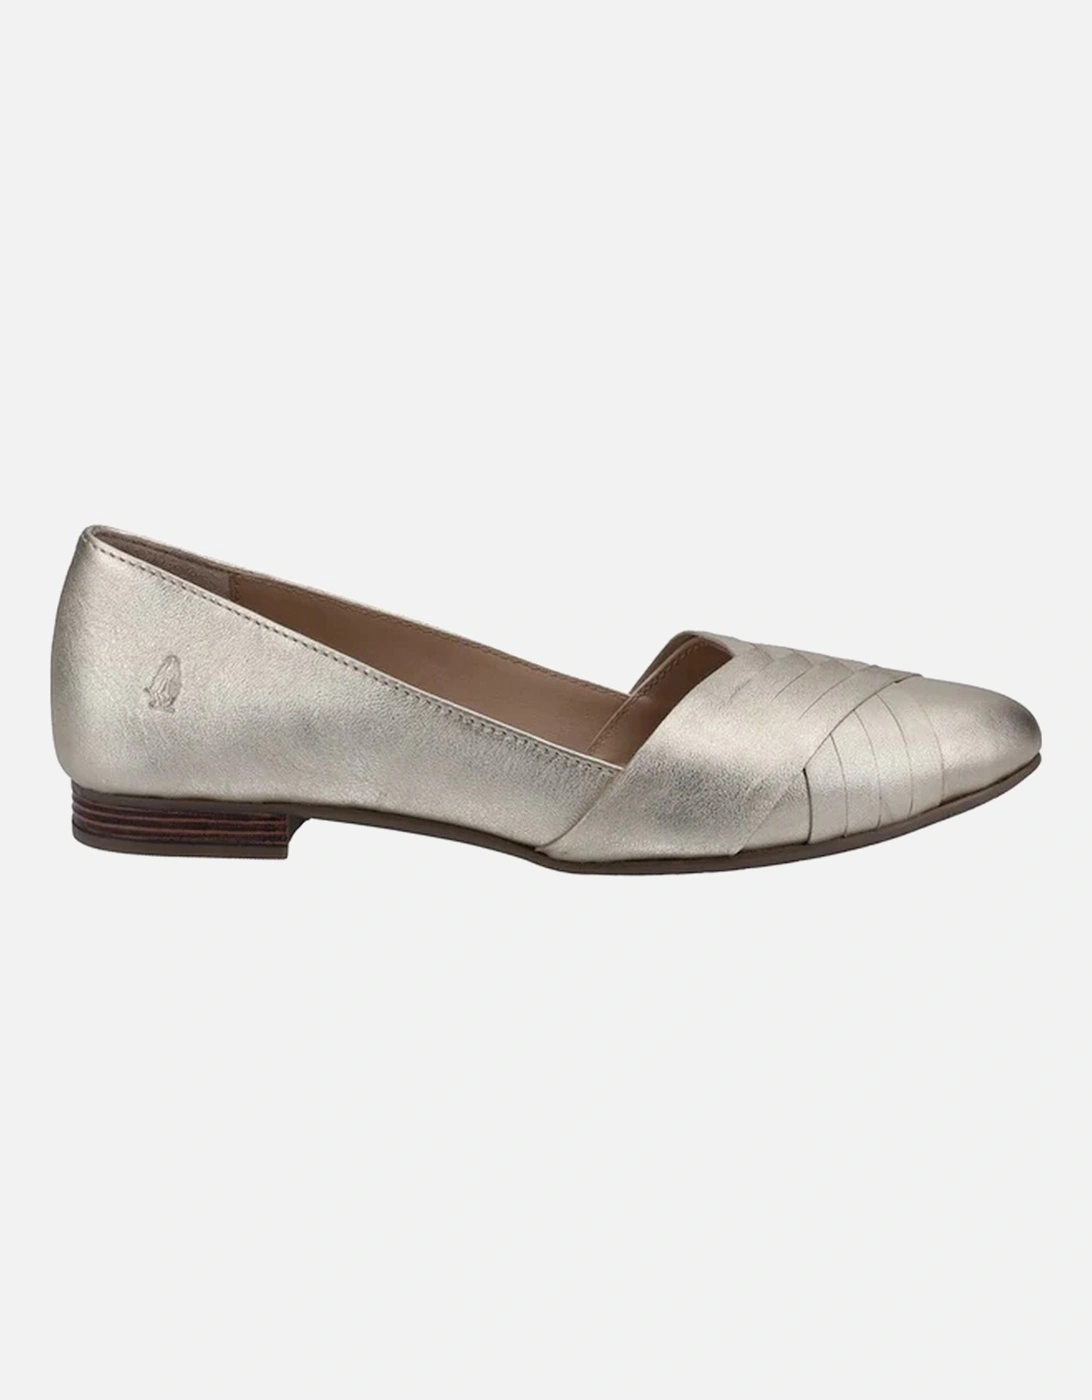 Womens/Ladies MARLEY Metallic Leather Ballet Shoes